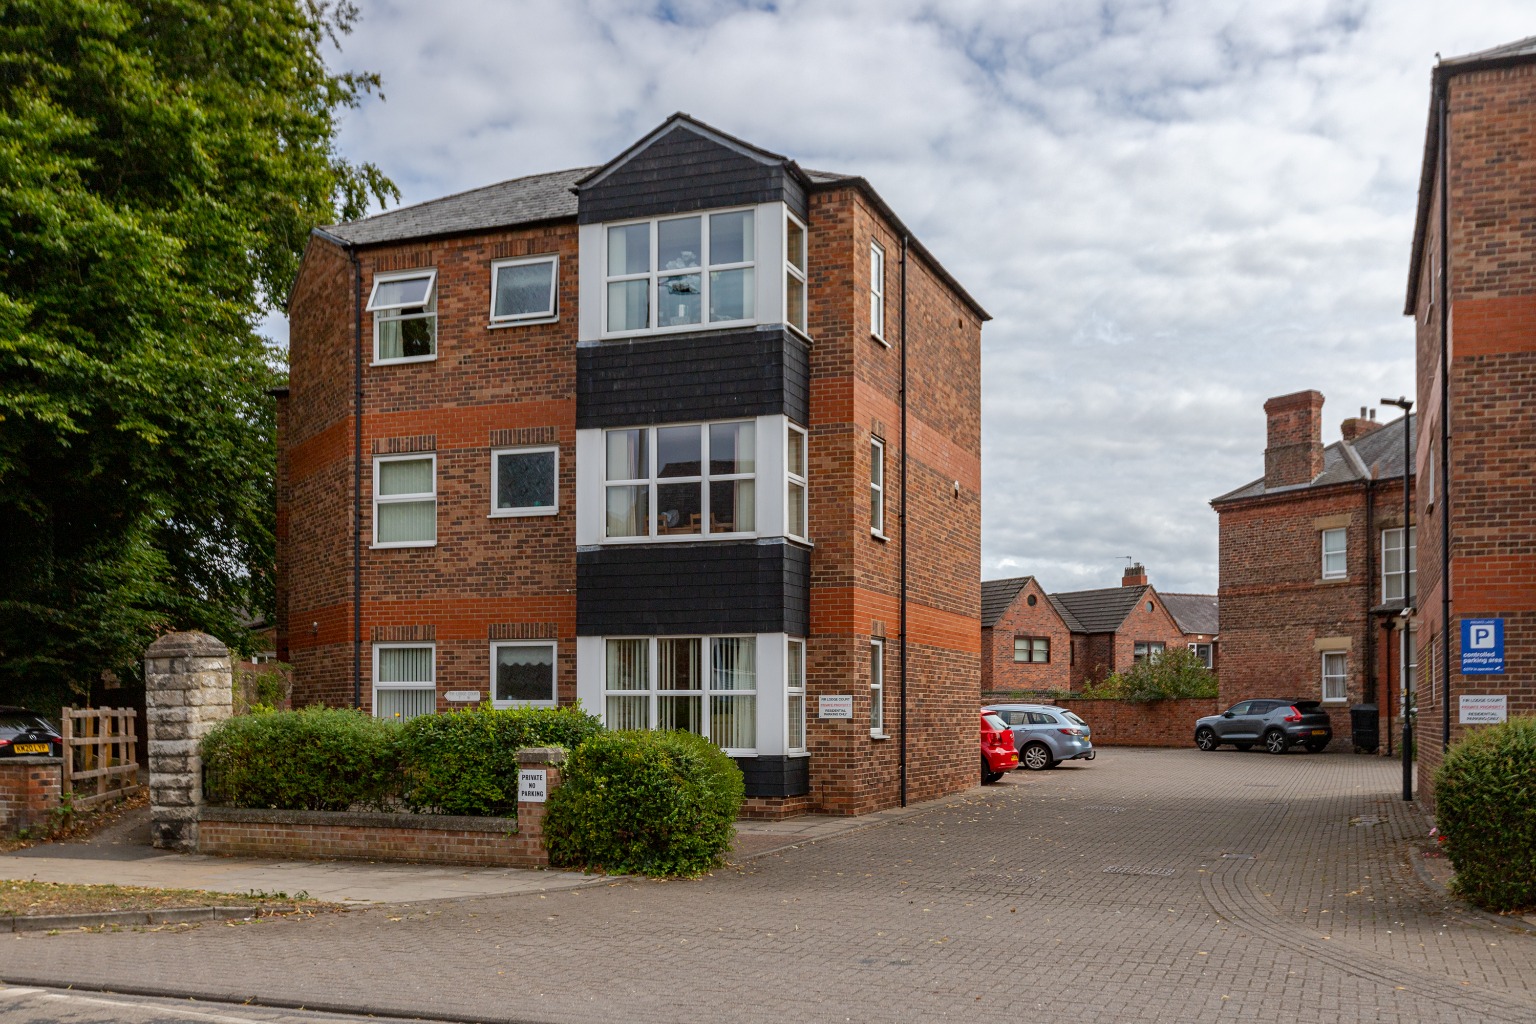 2 bed ground floor flat to rent in South Parade, Northallerton - Property Image 1